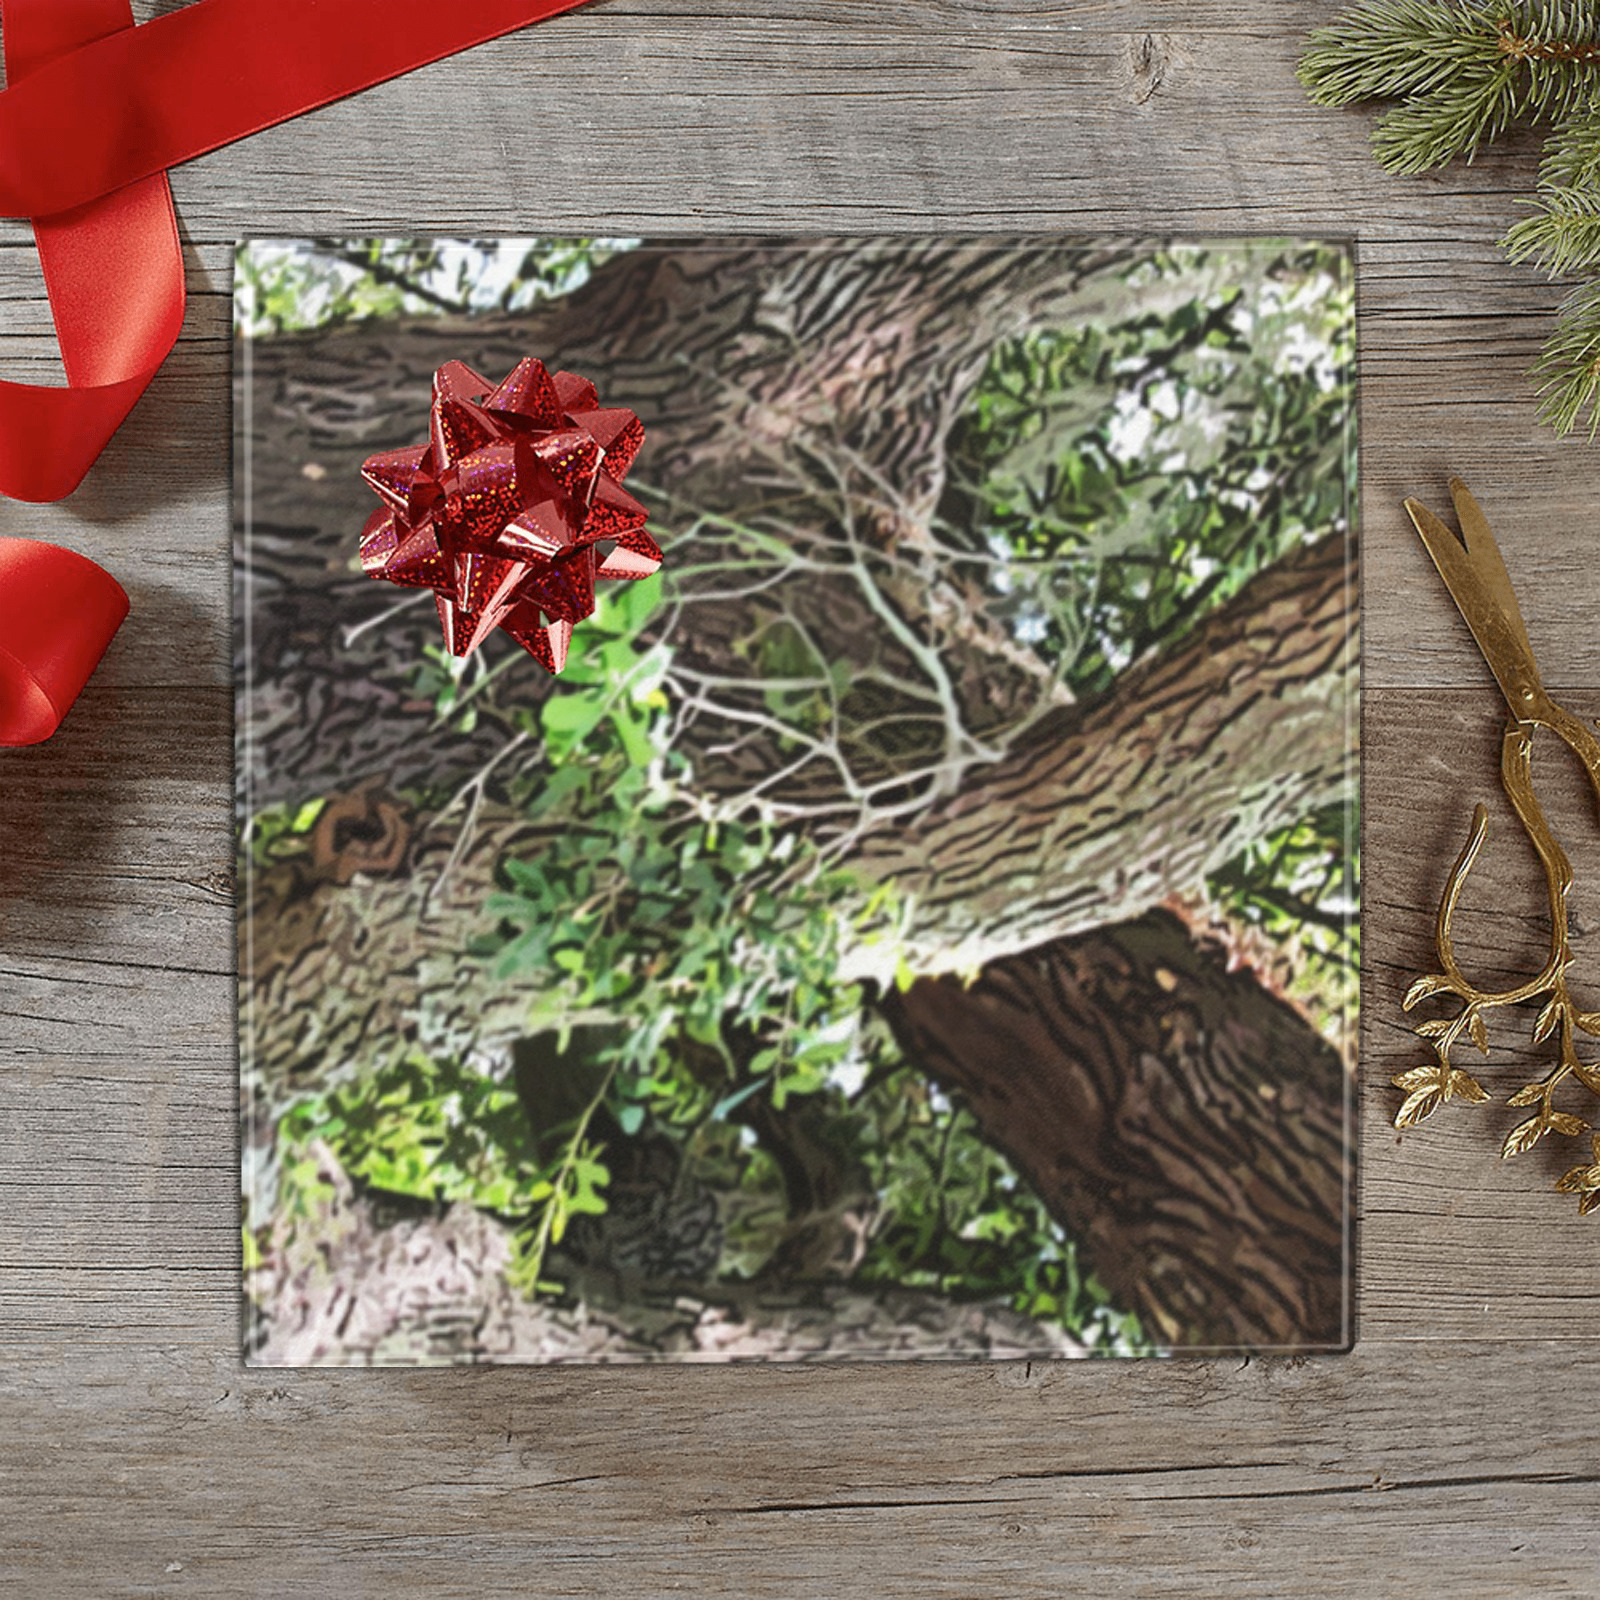 Oak Tree In The Park 7659 Stinson Park Jacksonville Florida Gift Wrapping Paper 58"x 23" (2 Rolls)